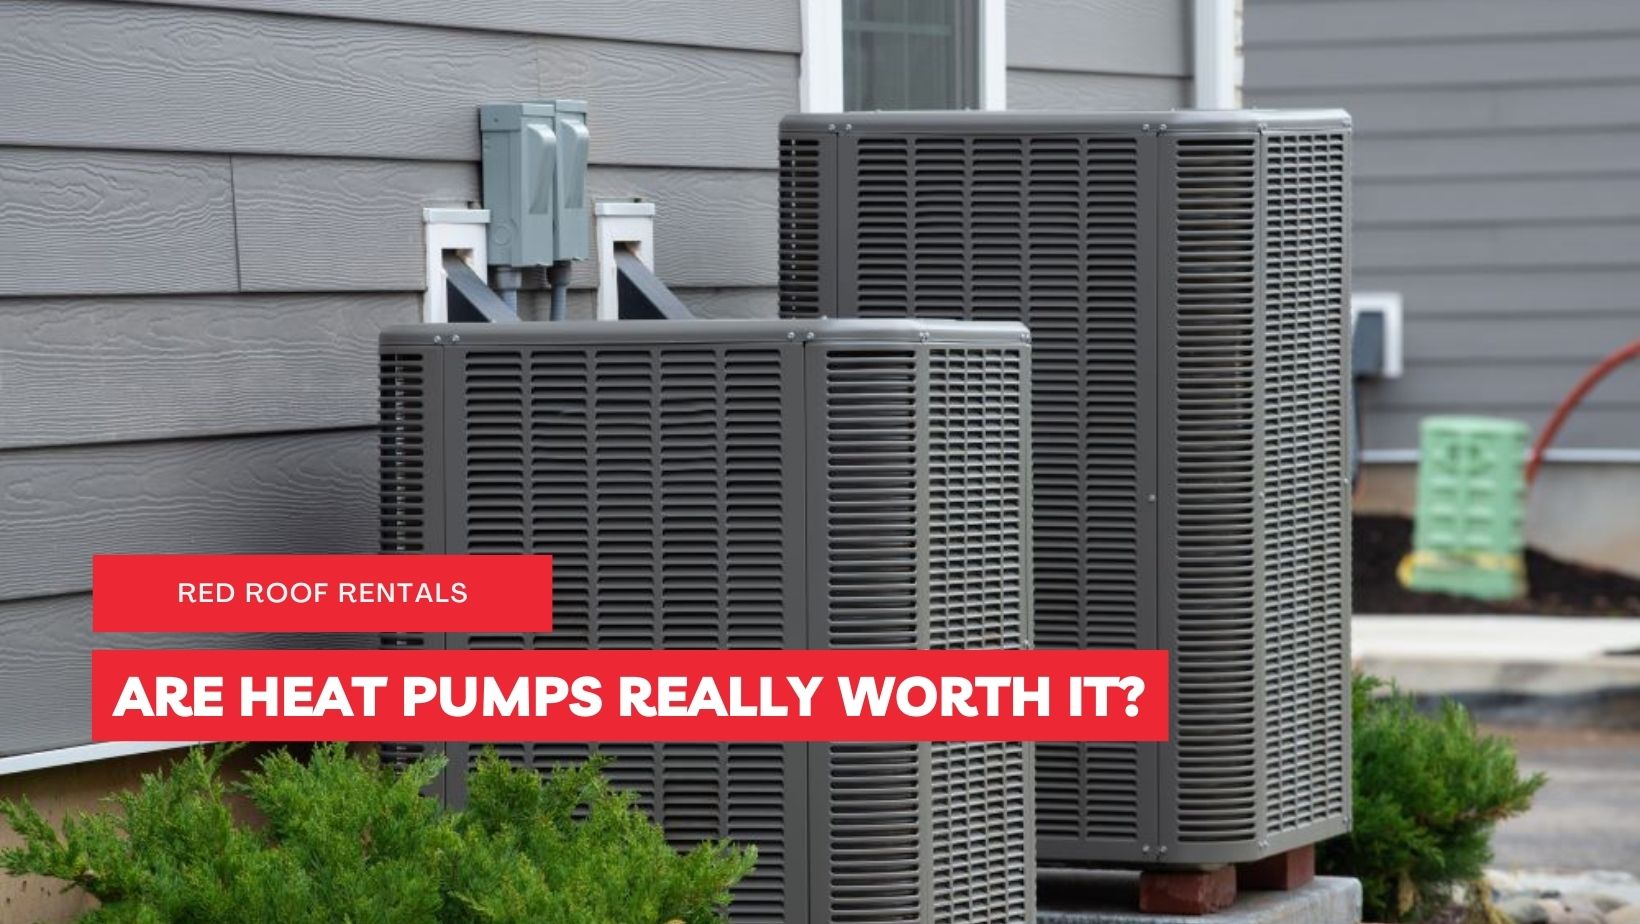 ARE HEAT PUMPS REALLY WORTH IT?